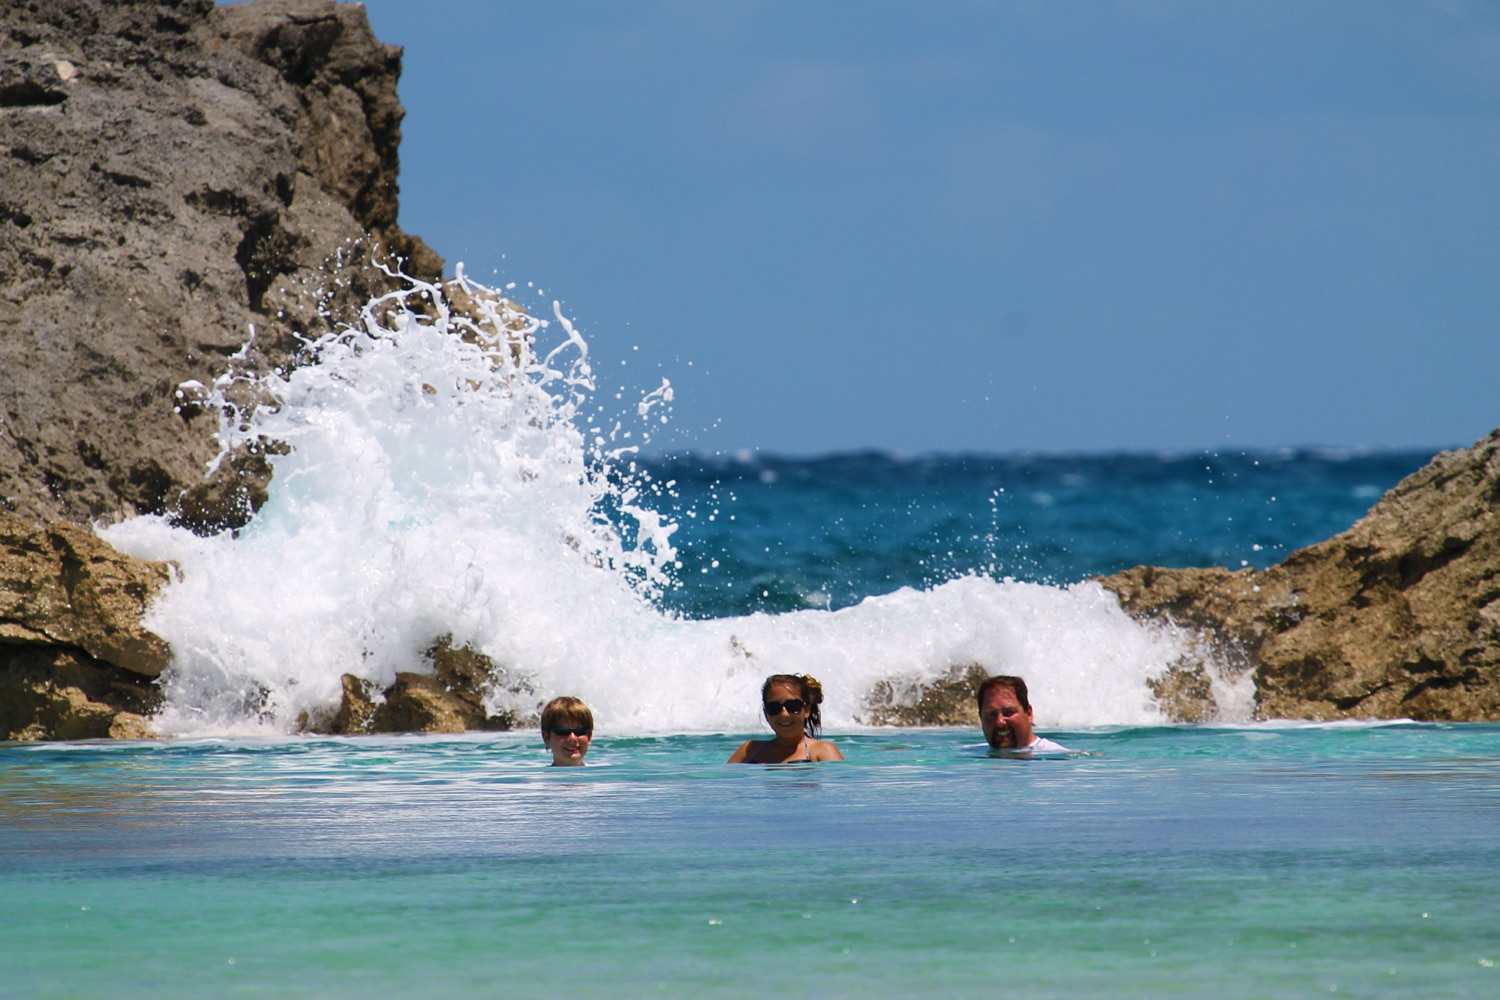 A group of people enjoying a vacation in the water at Staniel Cay, The Bahamas.